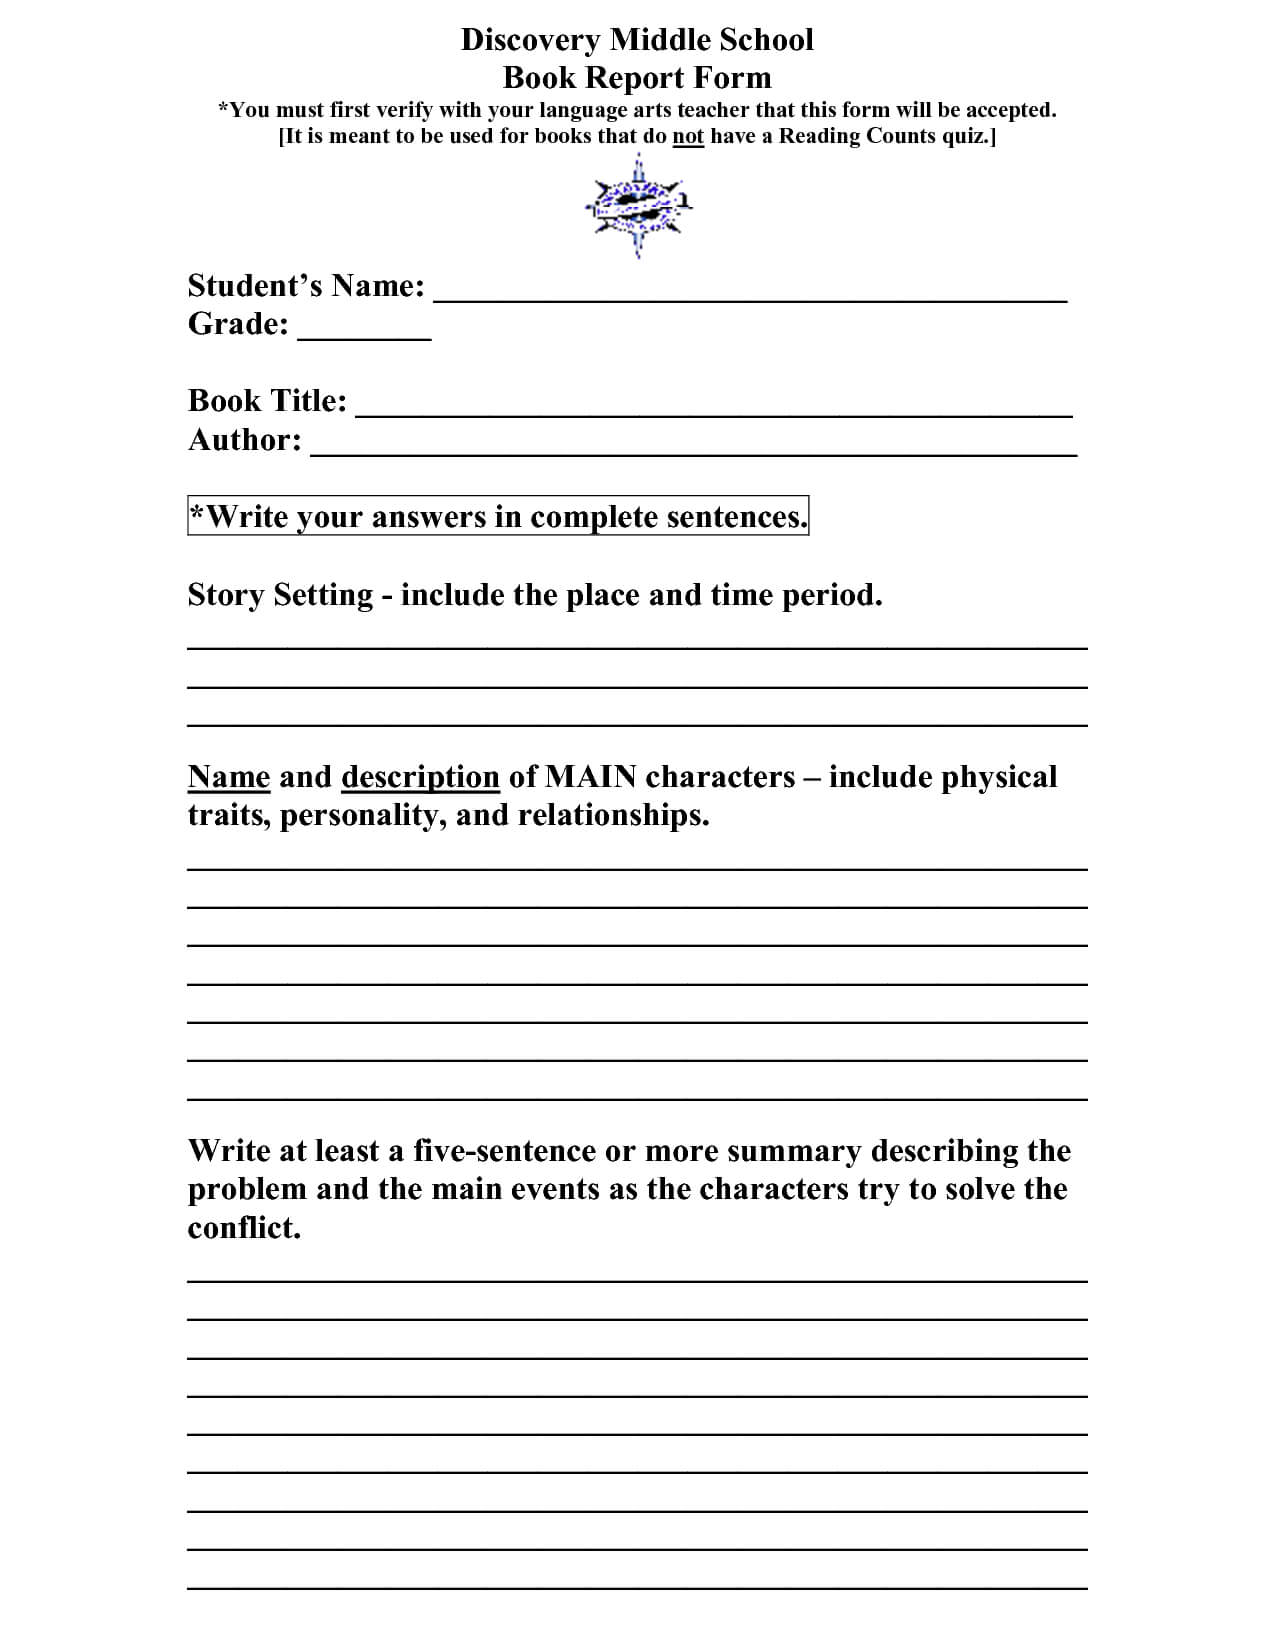 Scope Of Work Template | Book Report Templates, High School Pertaining To Middle School Book Report Template